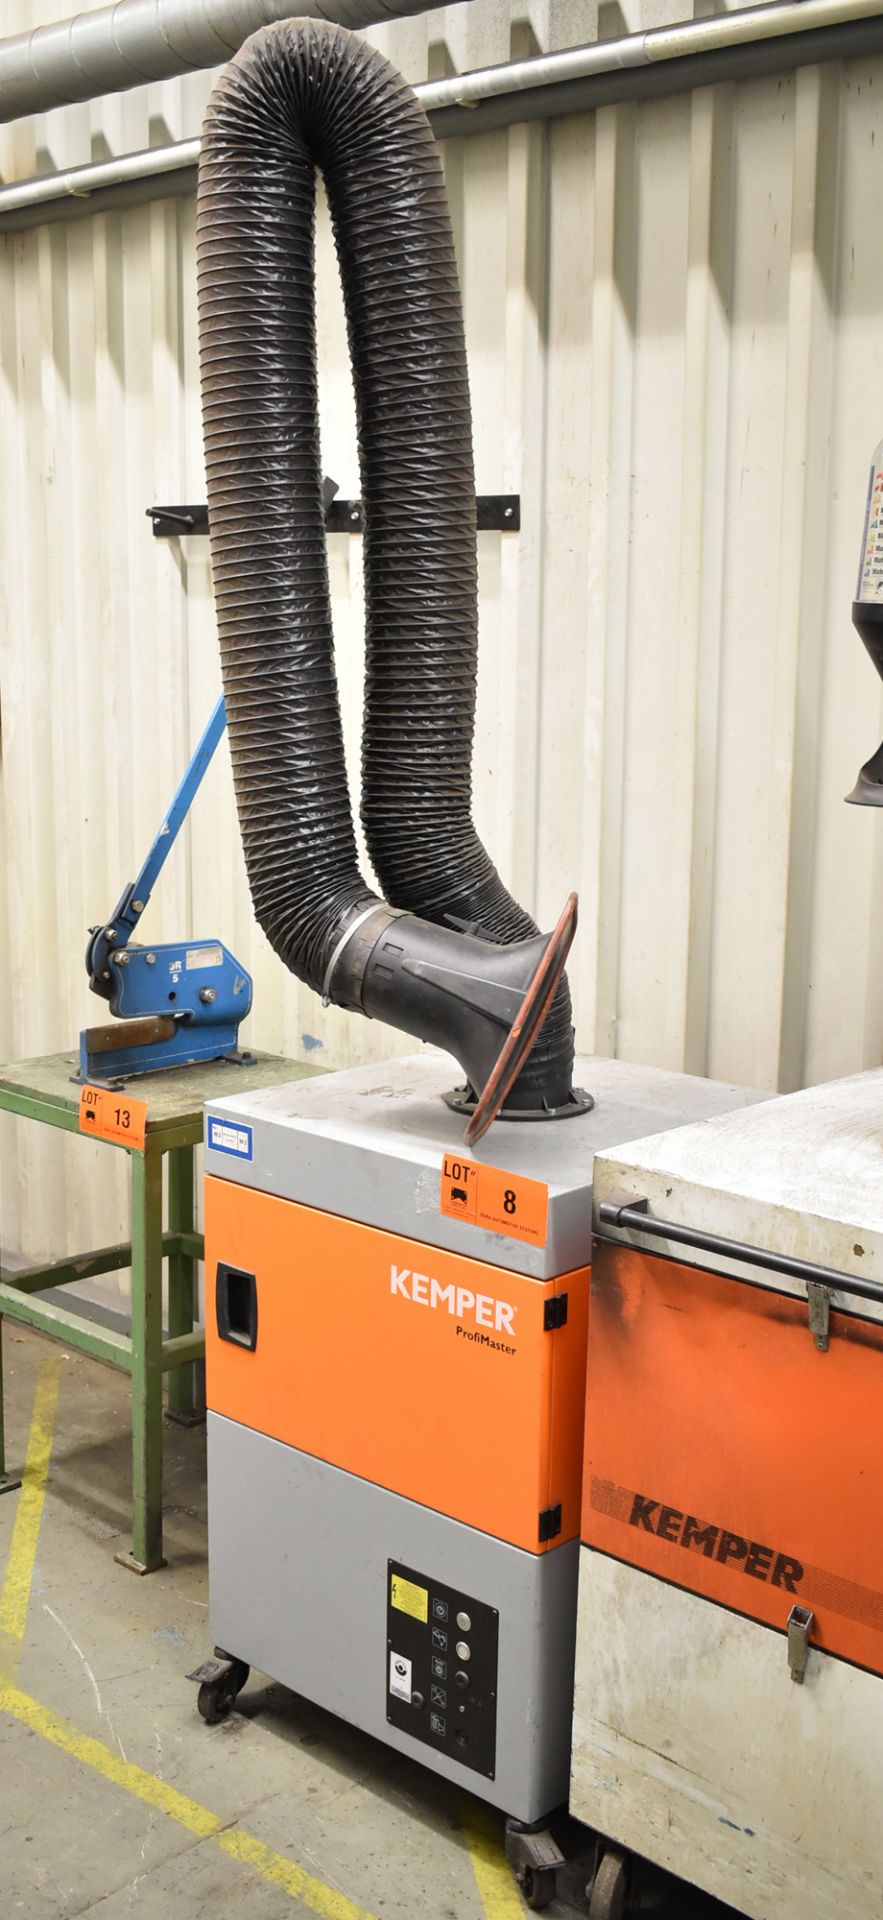 KEMPER PROFIMASTER PORTABLE WELDING FUME EXTRACTOR, S/N N/A (BAU 9) [Removal Fee = € 27.50 +